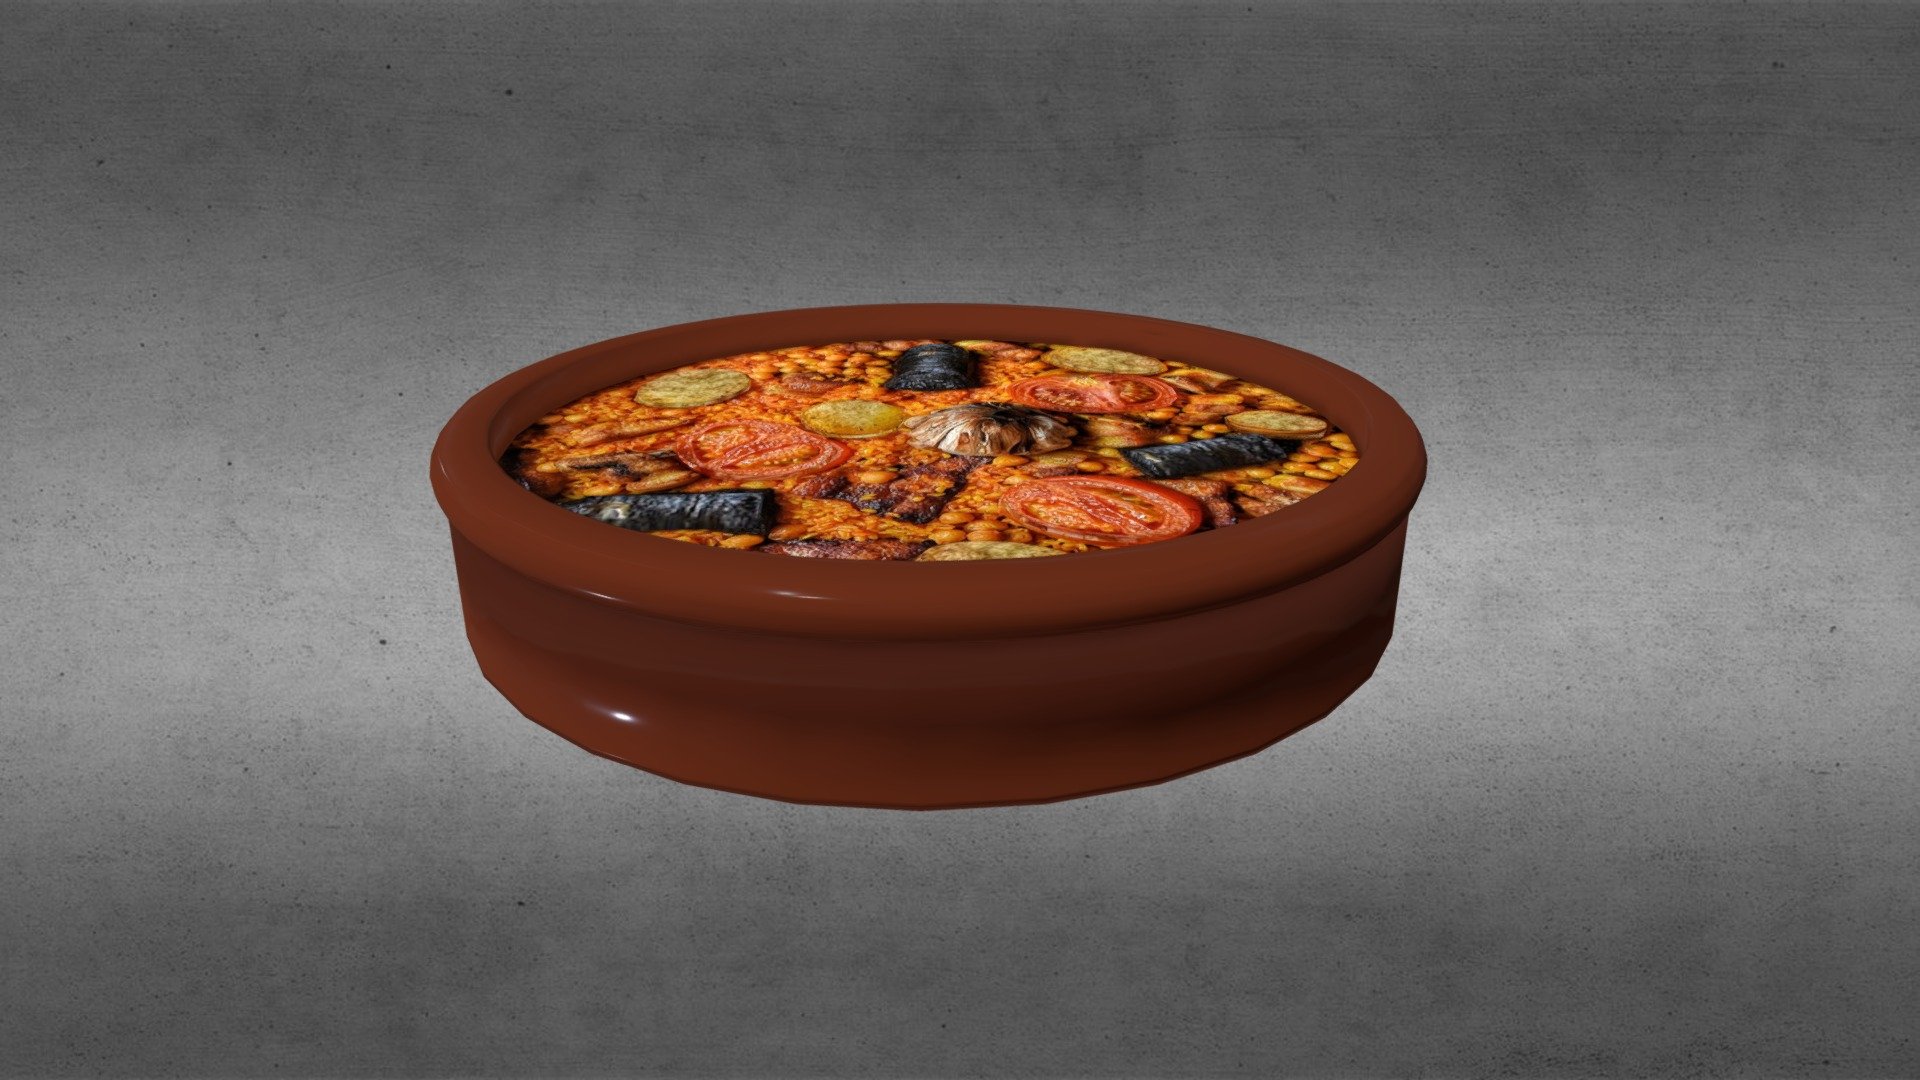 Baked rice (arrs al forn in Valencian) is a typical dish of the Valencian Community. It is made in clay casserole and cooked as the name suggests in the oven. For the container used in some places of the Valencian Community is called cassola (cassuela in Spanish).
Its origin is in the use of the remains of the stew so its main ingredients are chickpeas and the various products from the pig used in itselaboration (chorizo, sausage,meat and balls made with minced meat)along with the obtained broth. Potatoes, tomato and ahead of garlic are also added by crowning the casserole. It is also common to make without using the stew, simply with broth or even water and adding sausages, pork ribs and / or bacon 3d model